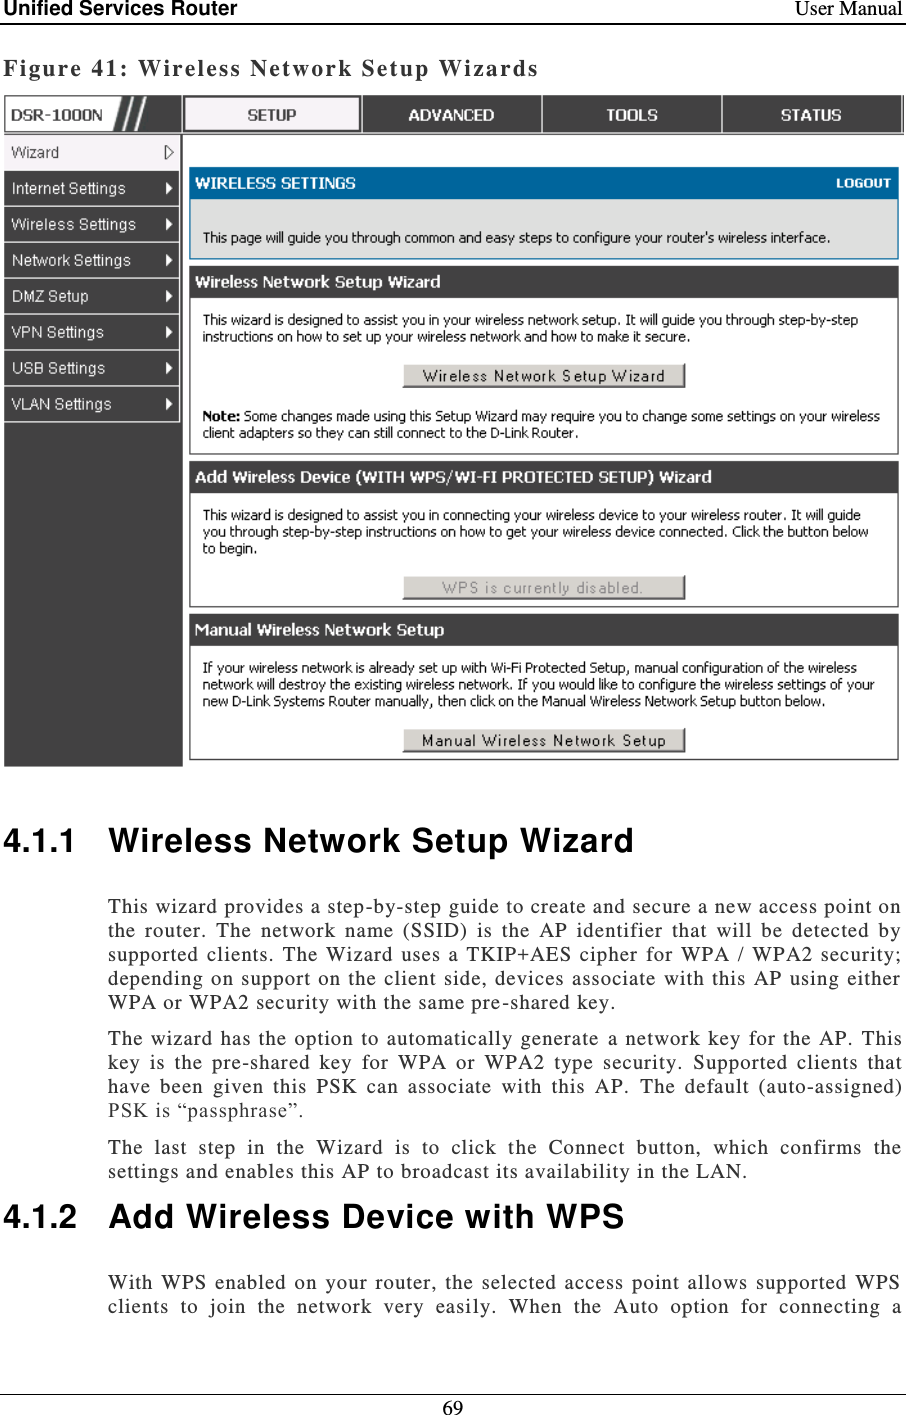 Unified Services Router    User Manual 69  Figure 41: Wireless  Network Setup Wi za rds    4.1.1  Wireless Network Setup Wizard This wizard provides a step-by-step guide to create and secure a new access point on the  router.  The  network  name  (SSID)  is  the  AP  identifier  that  will  be  detected  by supported  clients. The  Wizard  uses  a  TKIP+AES  cipher  for  WPA / WPA2 security; depending on  support on  the  client side,  devices associate  with this  AP  using either WPA or WPA2 security with the same pre-shared key. The wizard has the option to automatically generate   a  network  key  for the AP.  This key  is  the  pre-shared  key  for  WPA  or  WPA2  type  security.  Supported  clients  that have  been  given  this  PSK  can  associate  with  this  AP.  The  default  (auto-assigned) PSK is “passphrase”.  The  last  step  in  the  Wizard  is  to  click  the  Connect  button,  which  confirms  the settings and enables this AP to broadcast its availability in the LAN.   4.1.2  Add Wireless Device with WPS With  WPS enabled  on  your router,  the  selected  access  point allows  supported  WPS clients  to  join  the  network  very  easily.  When  the  Auto  option  for  connecting  a 